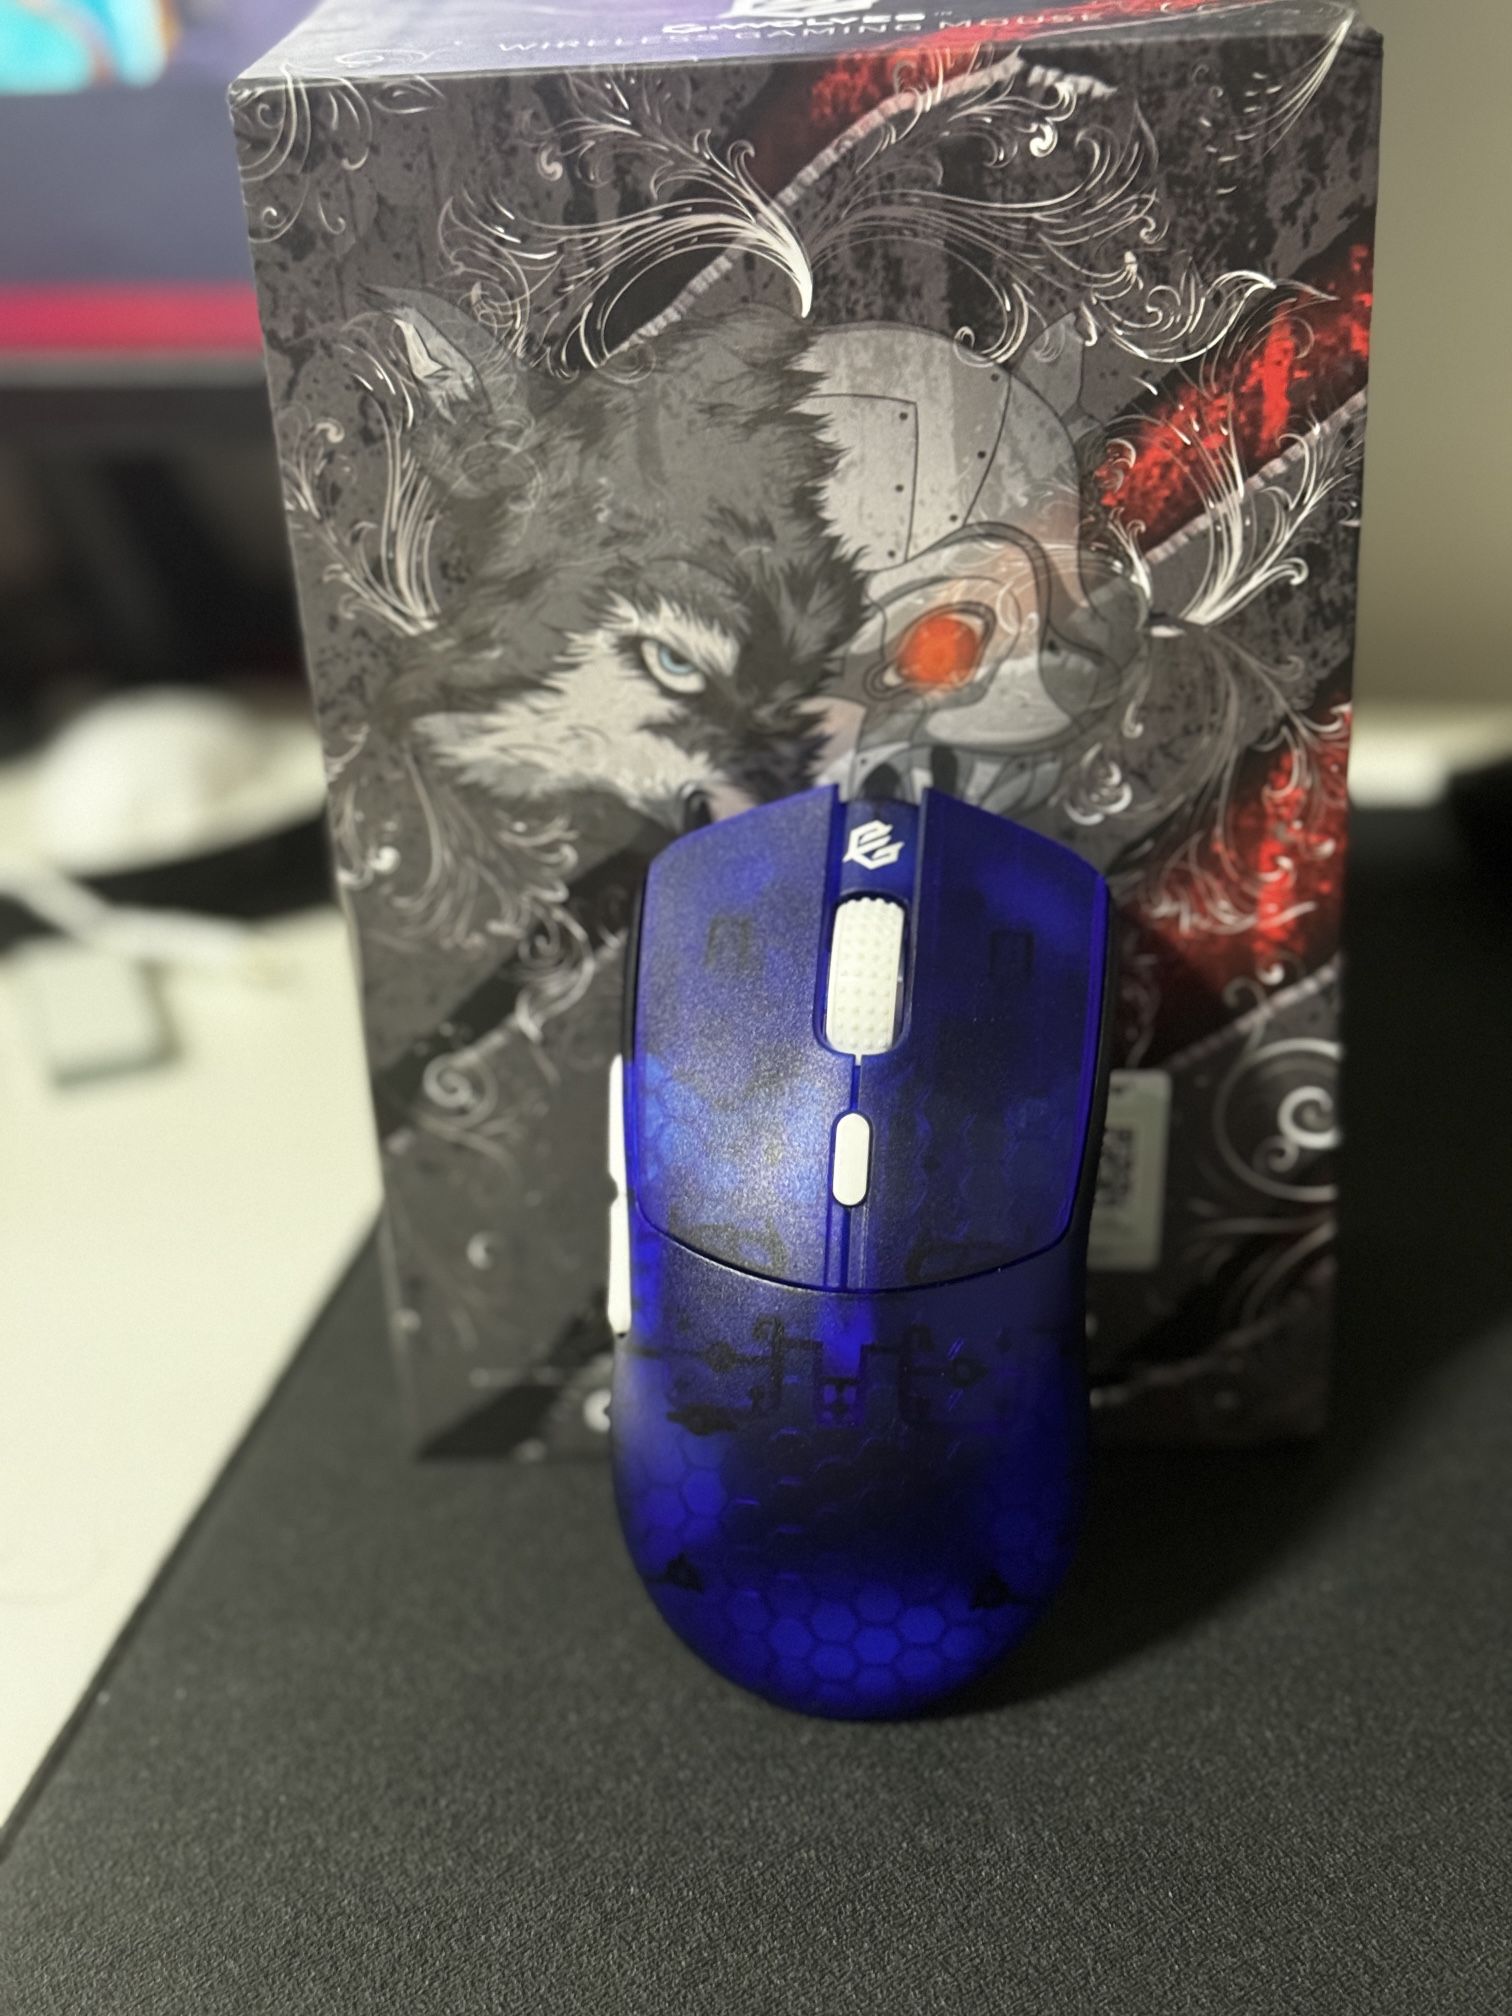 G WOLVES HTS 4k sapphire mouse